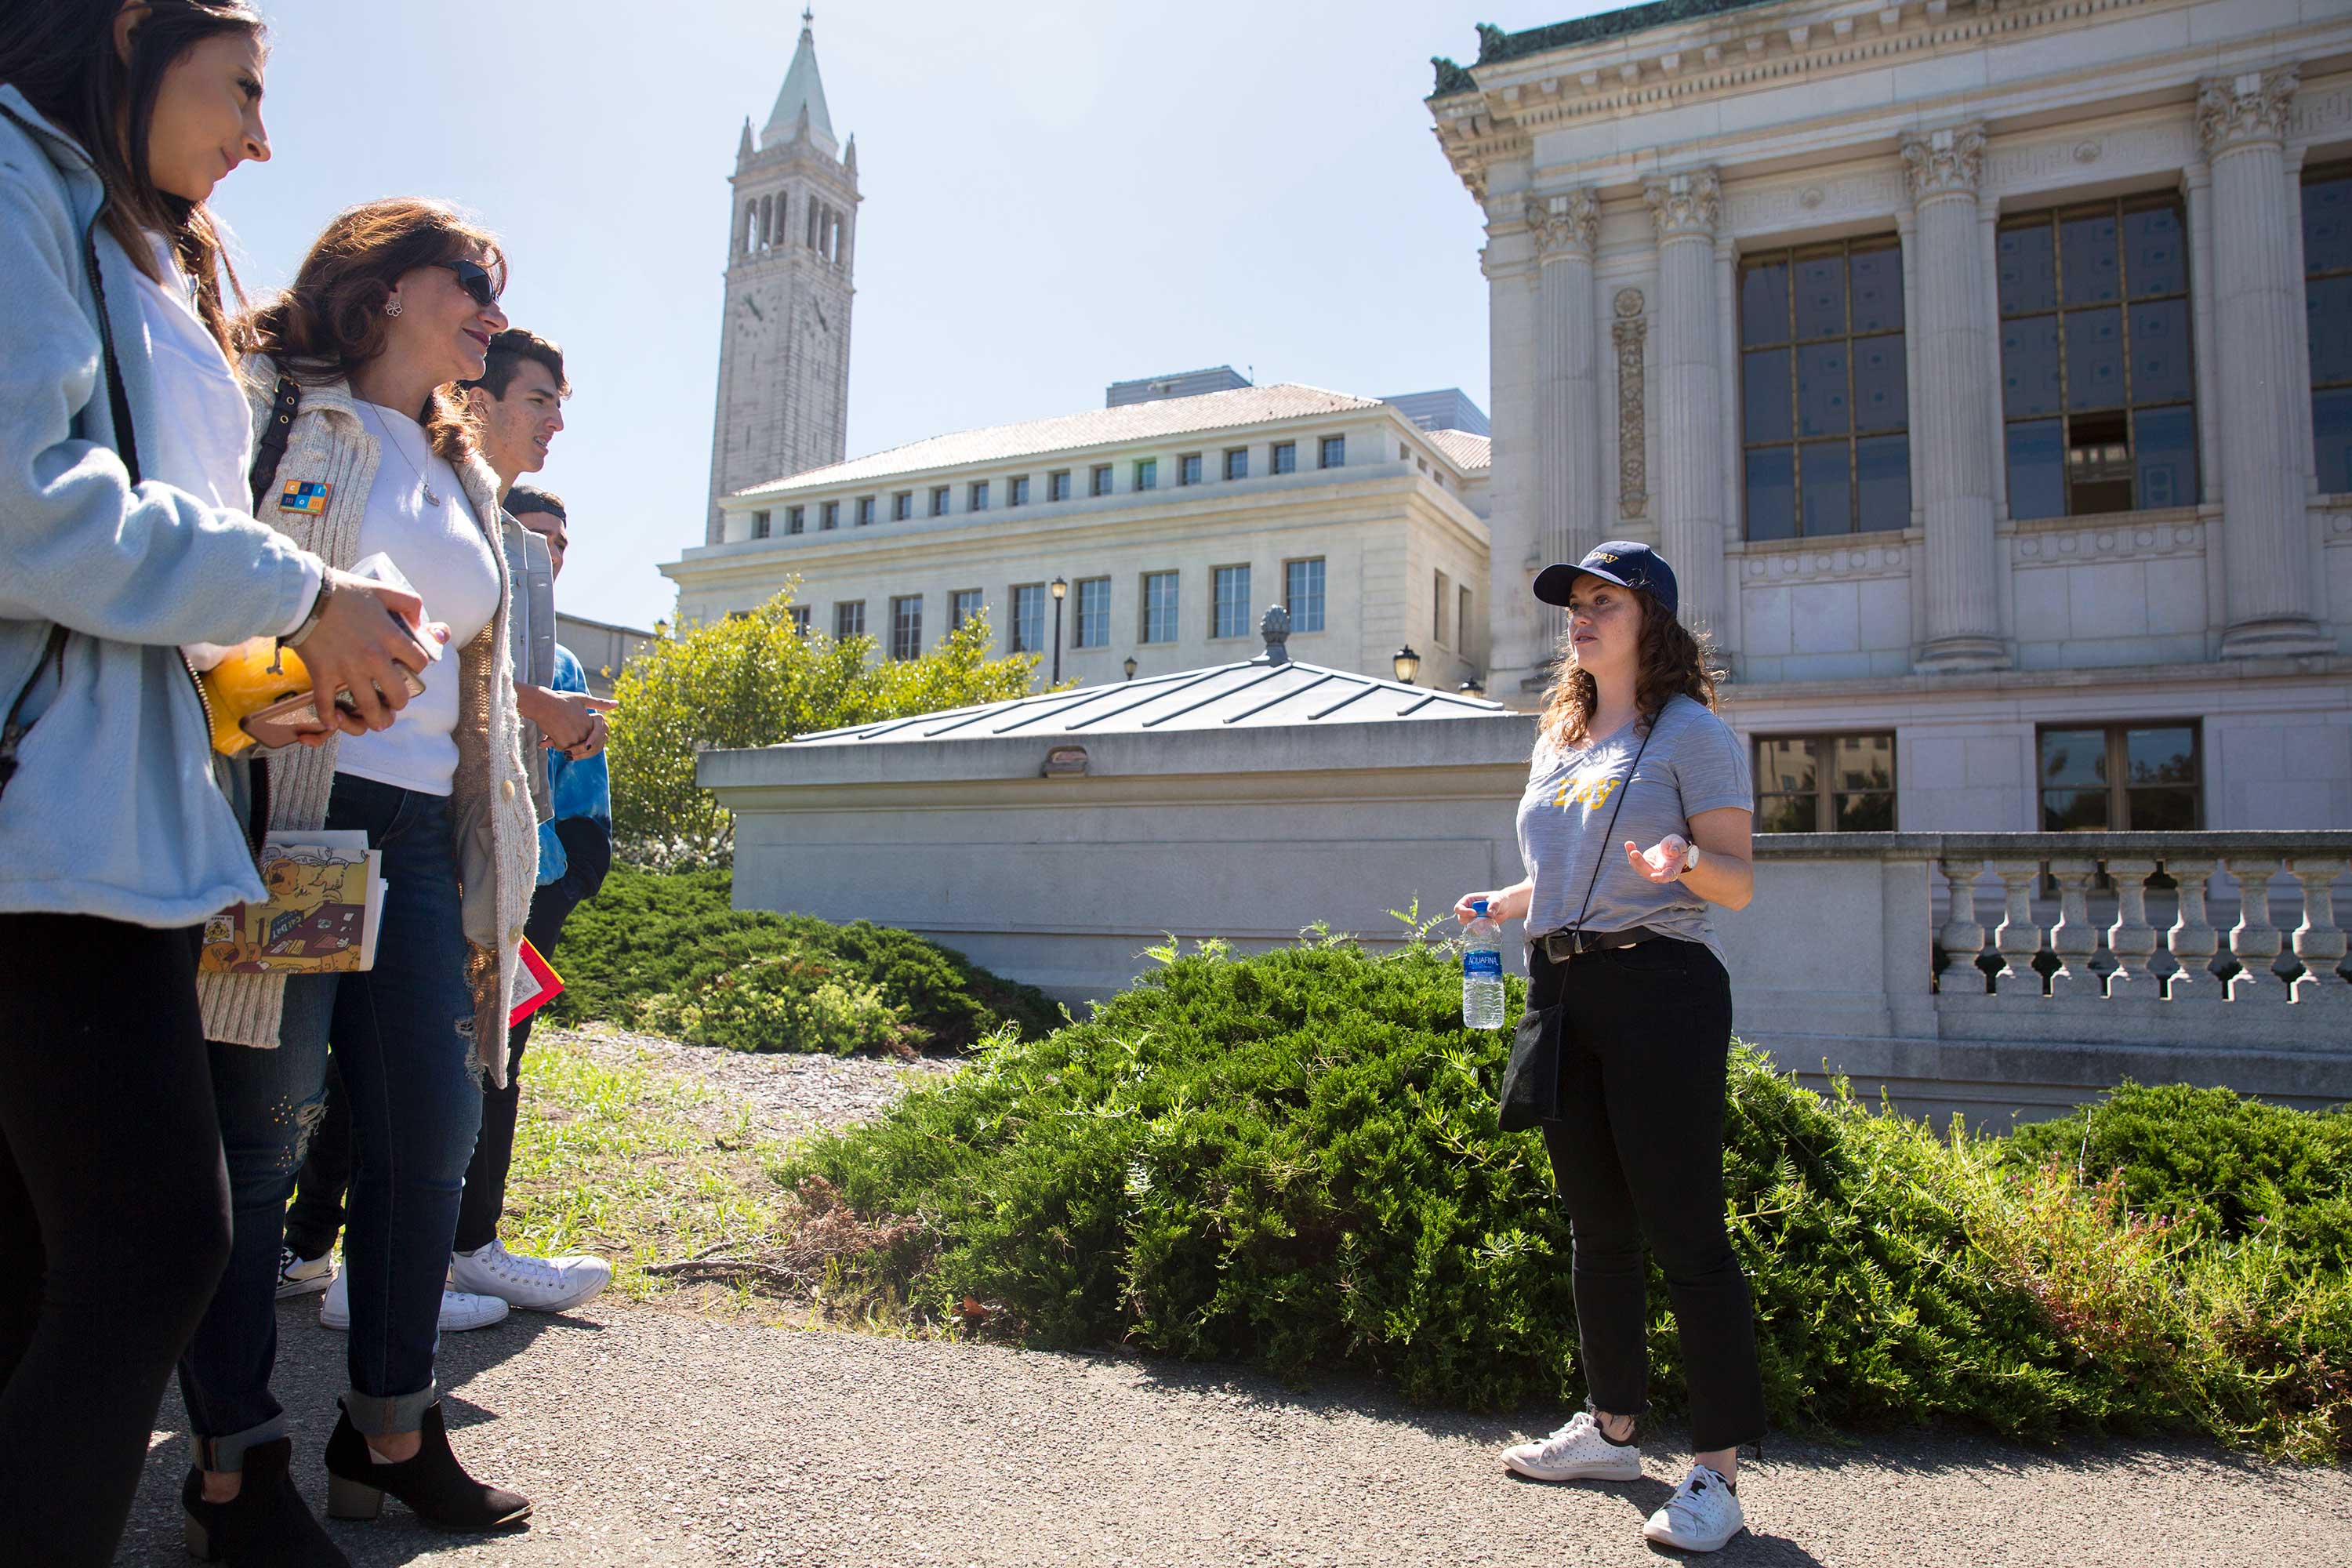 A tour guide giving a tour on the UC Berkeley campus.